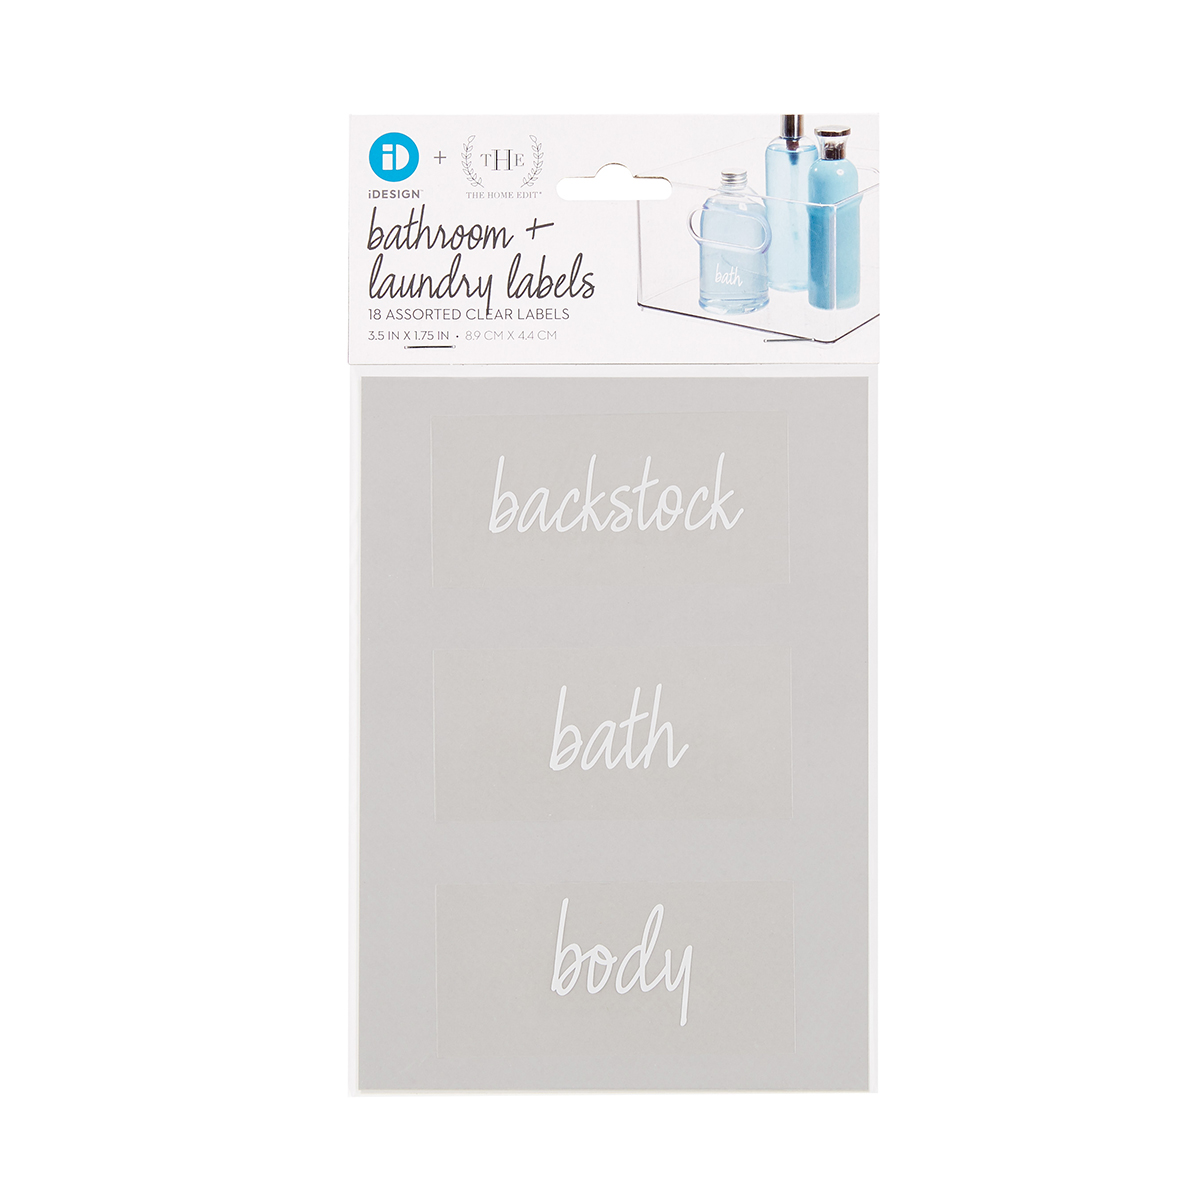 https://www.containerstore.com/catalogimages/392625/10079525-the-bath-labels.jpg